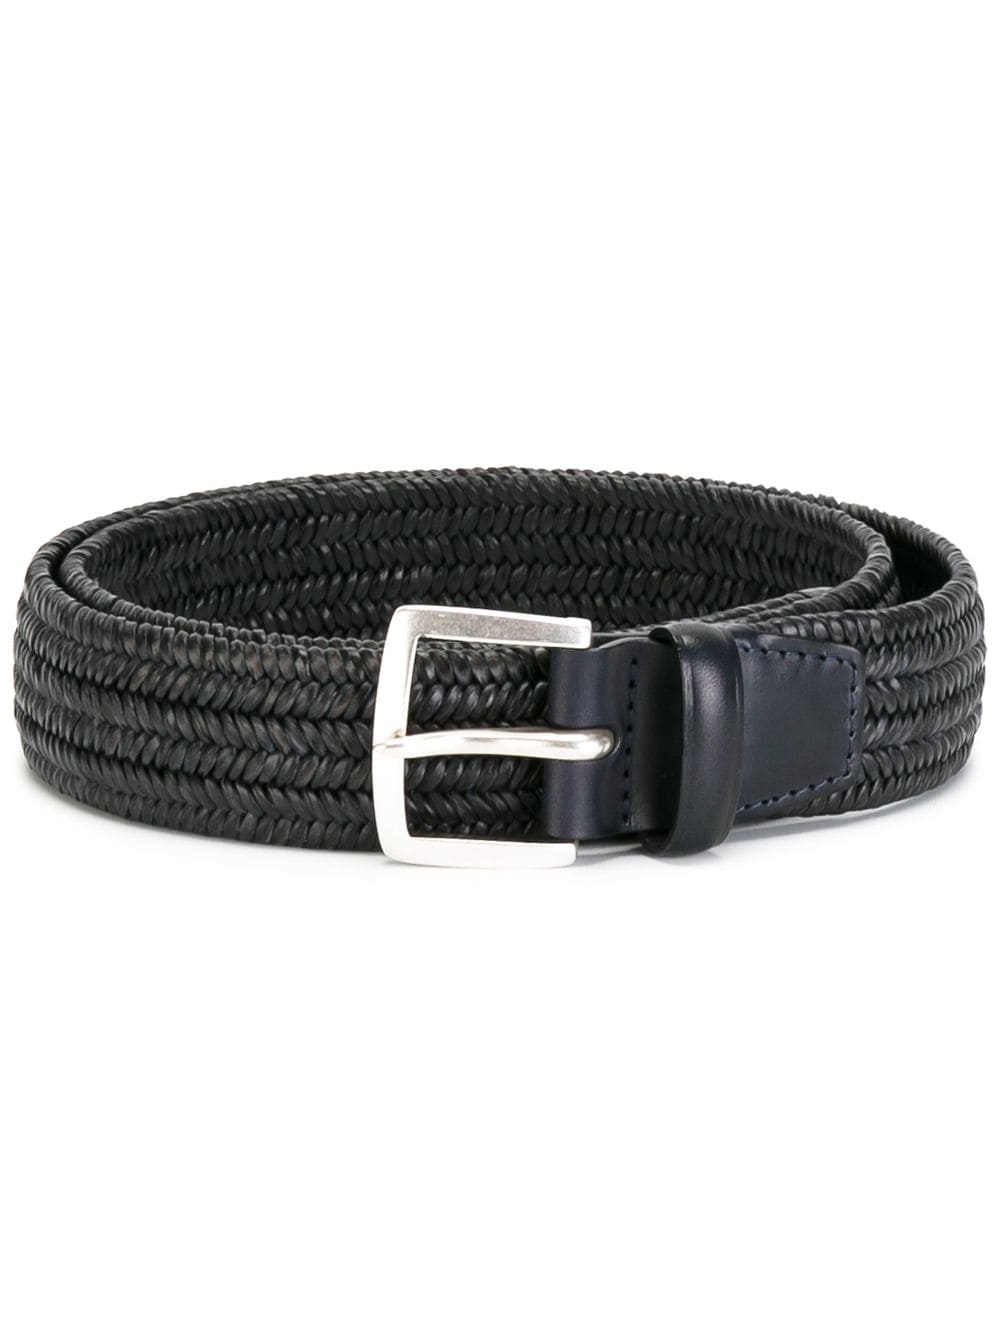 Orciani woven buckle belt - Blue von Orciani